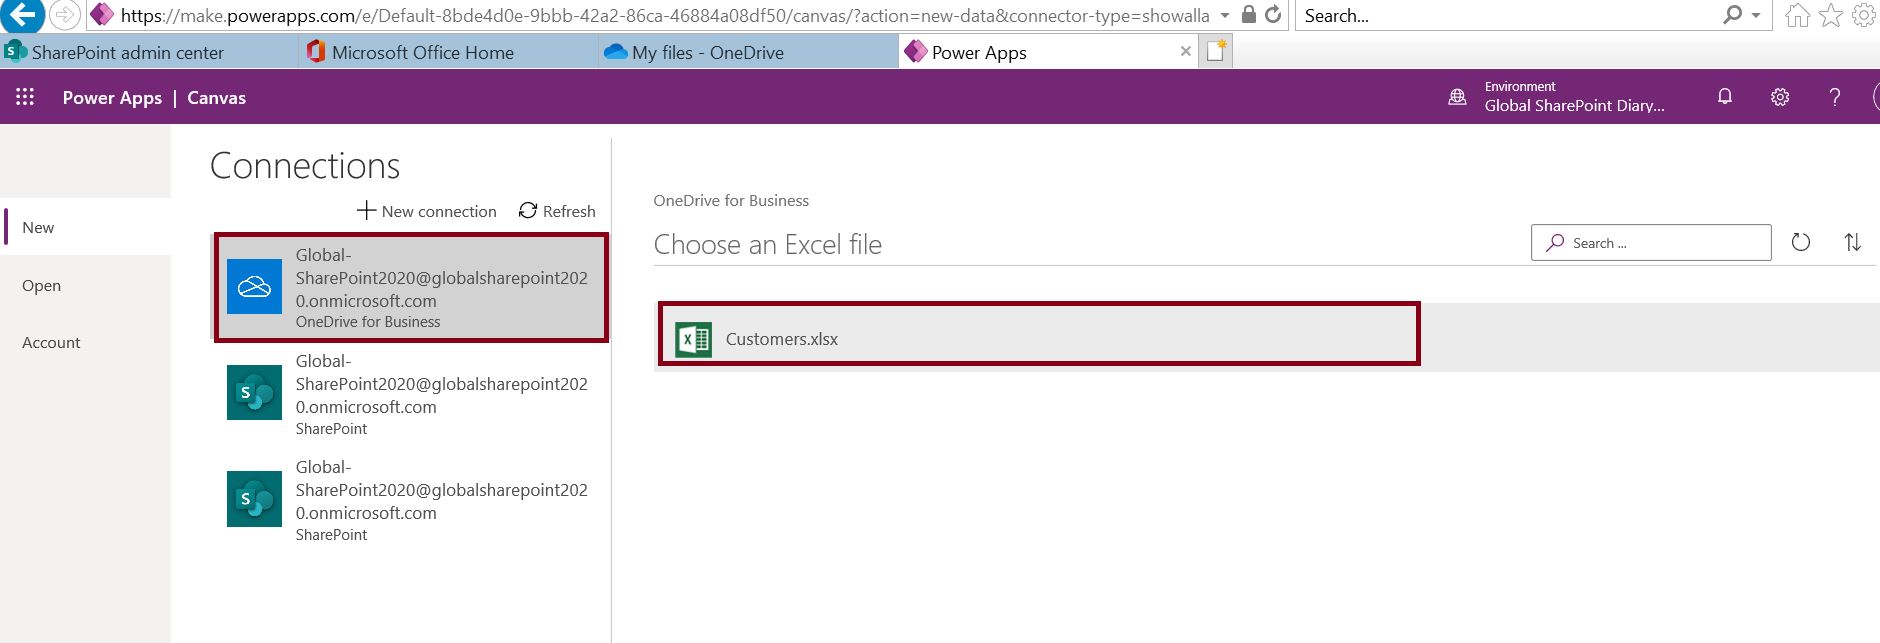 Choose an excel file from OneDrive connection in PowerApps